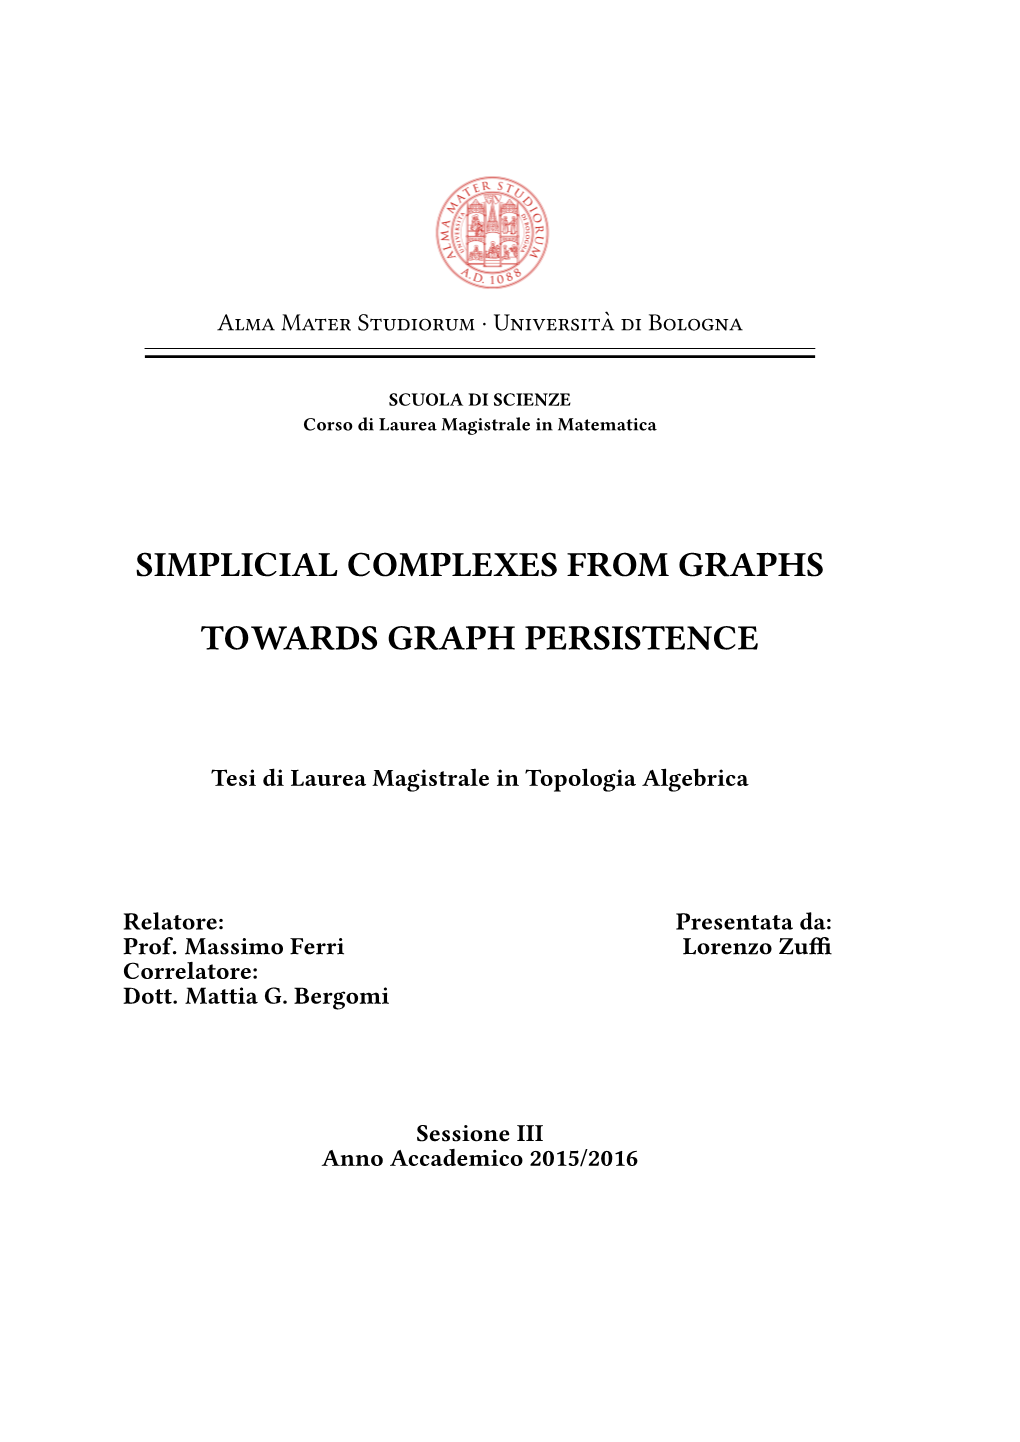 Simplicial Complexes from Graphs Towards Graph Persistence